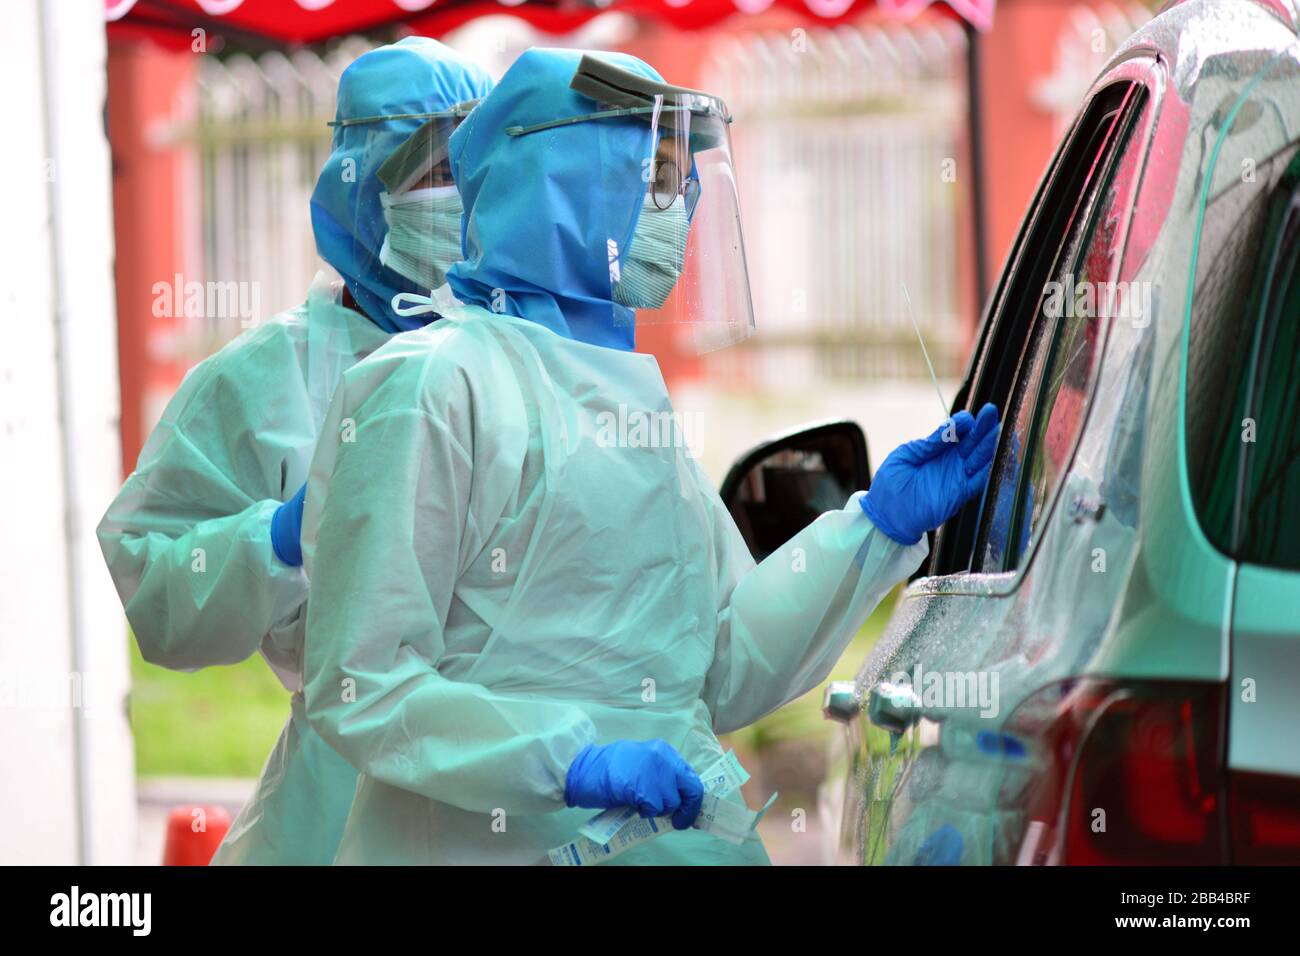 Kuala Lumpur, Malaysia. 30th Mar, 2020. A medical staff member takes the sample from a drive-through resident at a COVID-19 testing area of a hospital in Damansara near Kuala Lumpur, Malaysia, March 30, 2020. A total of 37 people have died of the COVID-19 in Malaysia as of Monday with 156 newly confirmed cases, bringing the total to 2,626, said the Health Ministry. Credit: Chong Voon Chung/Xinhua/Alamy Live News Stock Photo